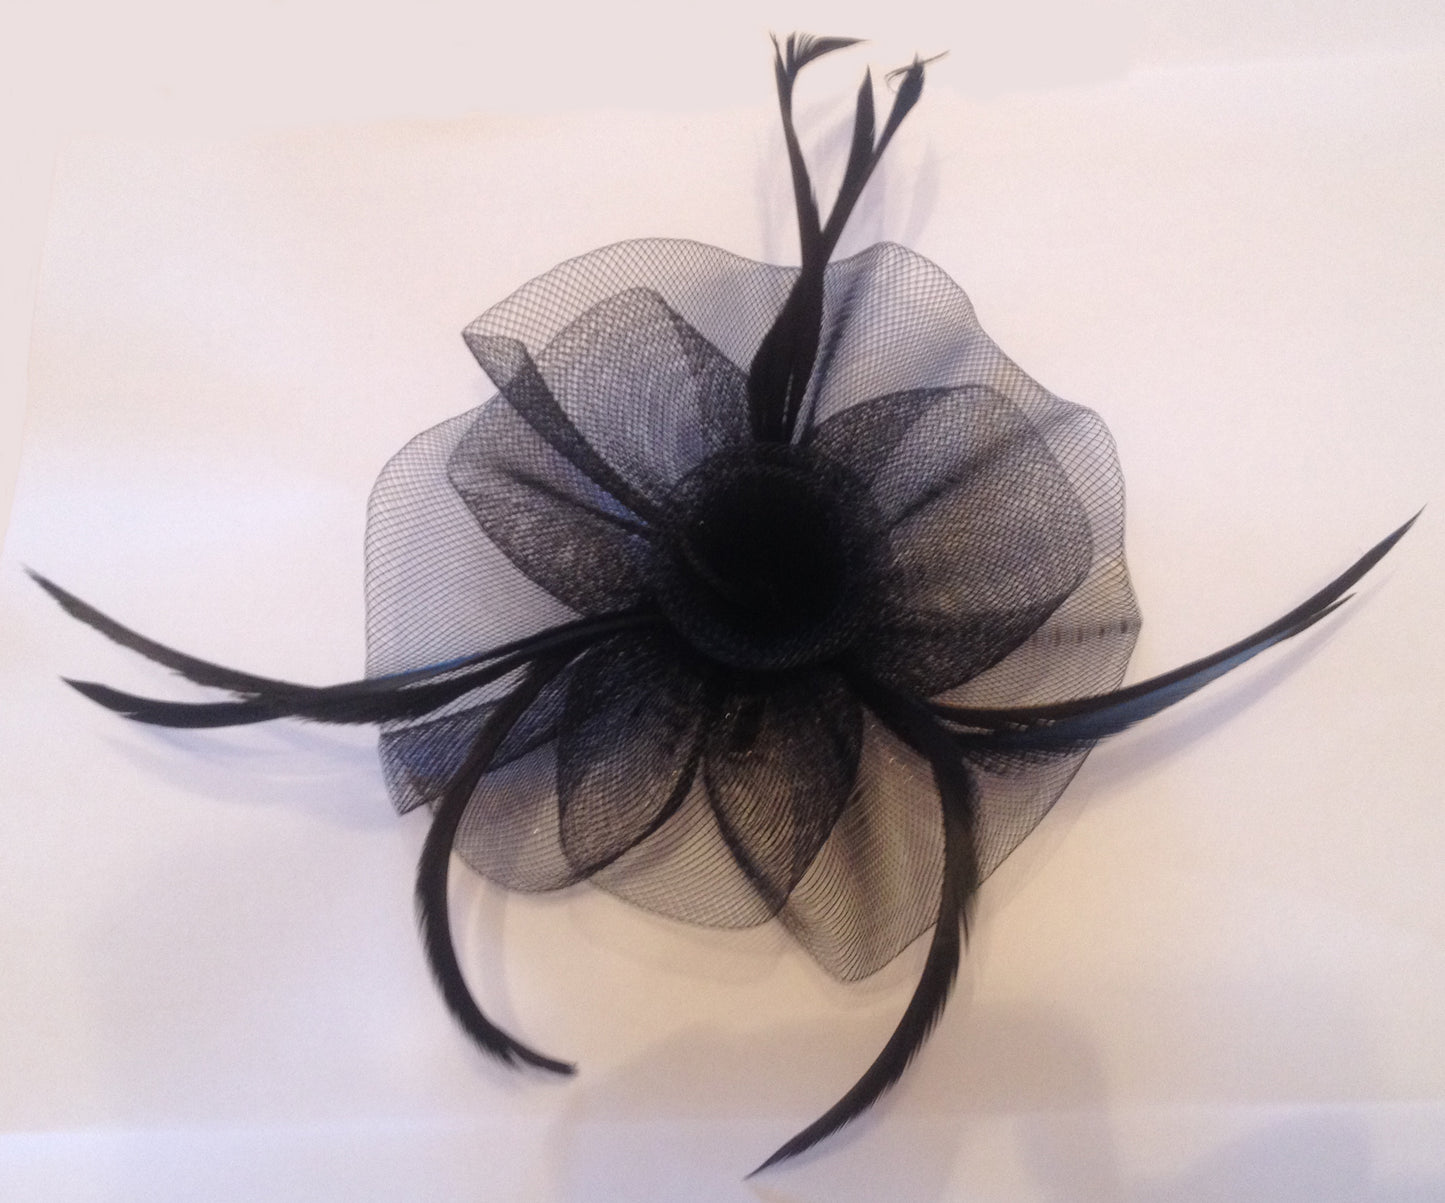 Black Fascinator, Suitable for any occasion including cocktail parties, a day at the races, corporate events, funerals and other formal occasions